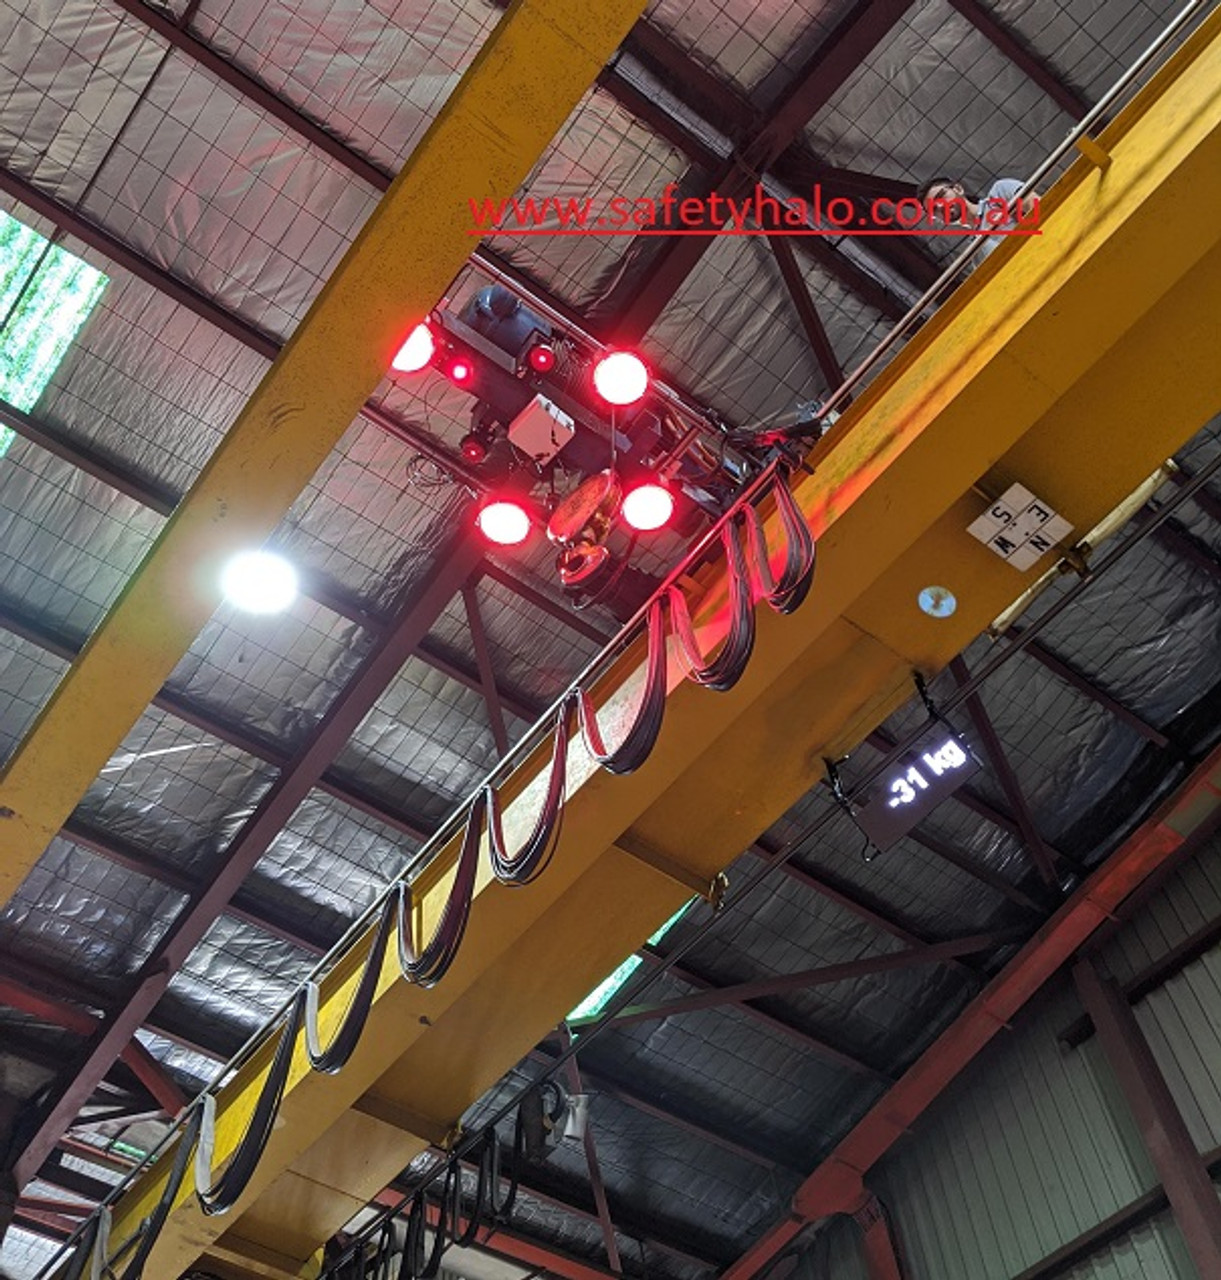 8. Overhead Crane Awareness Safety Halo Boundary Light System. LED Red Line Visual Boundary. Creating a Red Boundary Area Around the Hock and Load of the Crane. SHRLHD-S1 